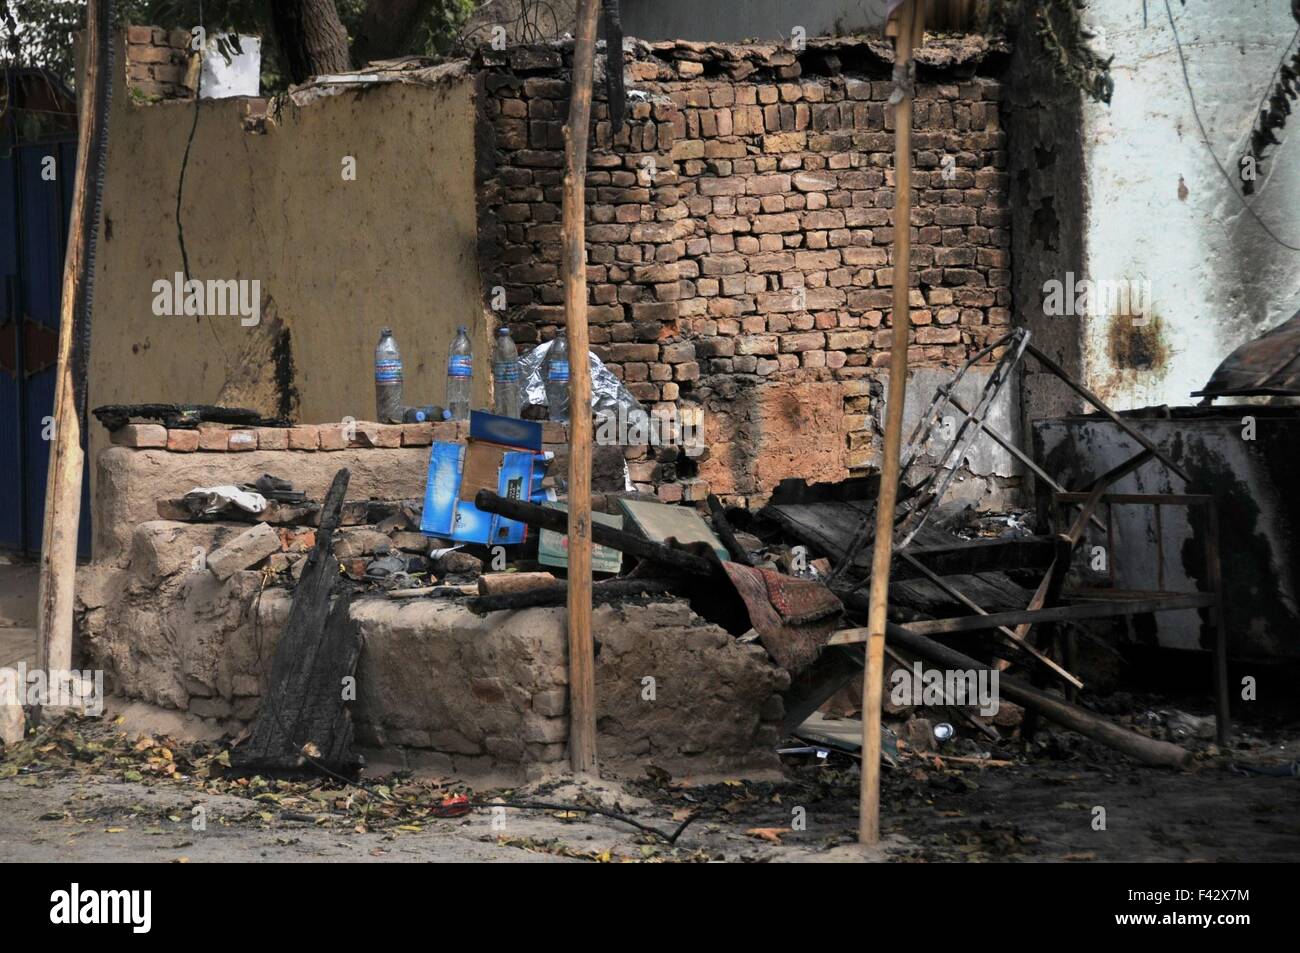 Kunduz, Kunduz province of Afghanistan. 14th Oct, 2015. The burnt Medecins Sans Frontieres (MSF) hospital is seen after a U.S. airstrike in Kunduz city, capital of northern Kunduz province of Afghanistan, Oct. 14, 2015. Though progress has been made to launch an independent investigation into U.S. attacks hitting Medecins Sans Frontieres (MSF) facilities in the Afghan city of Kunduz, discussions are still ongoing with both U.S. and Afghan governments whose assent is needed for the investigation to go forward, an MSF official said on Oct. 13. © Ajmal/Xinhua/Alamy Live News Stock Photo